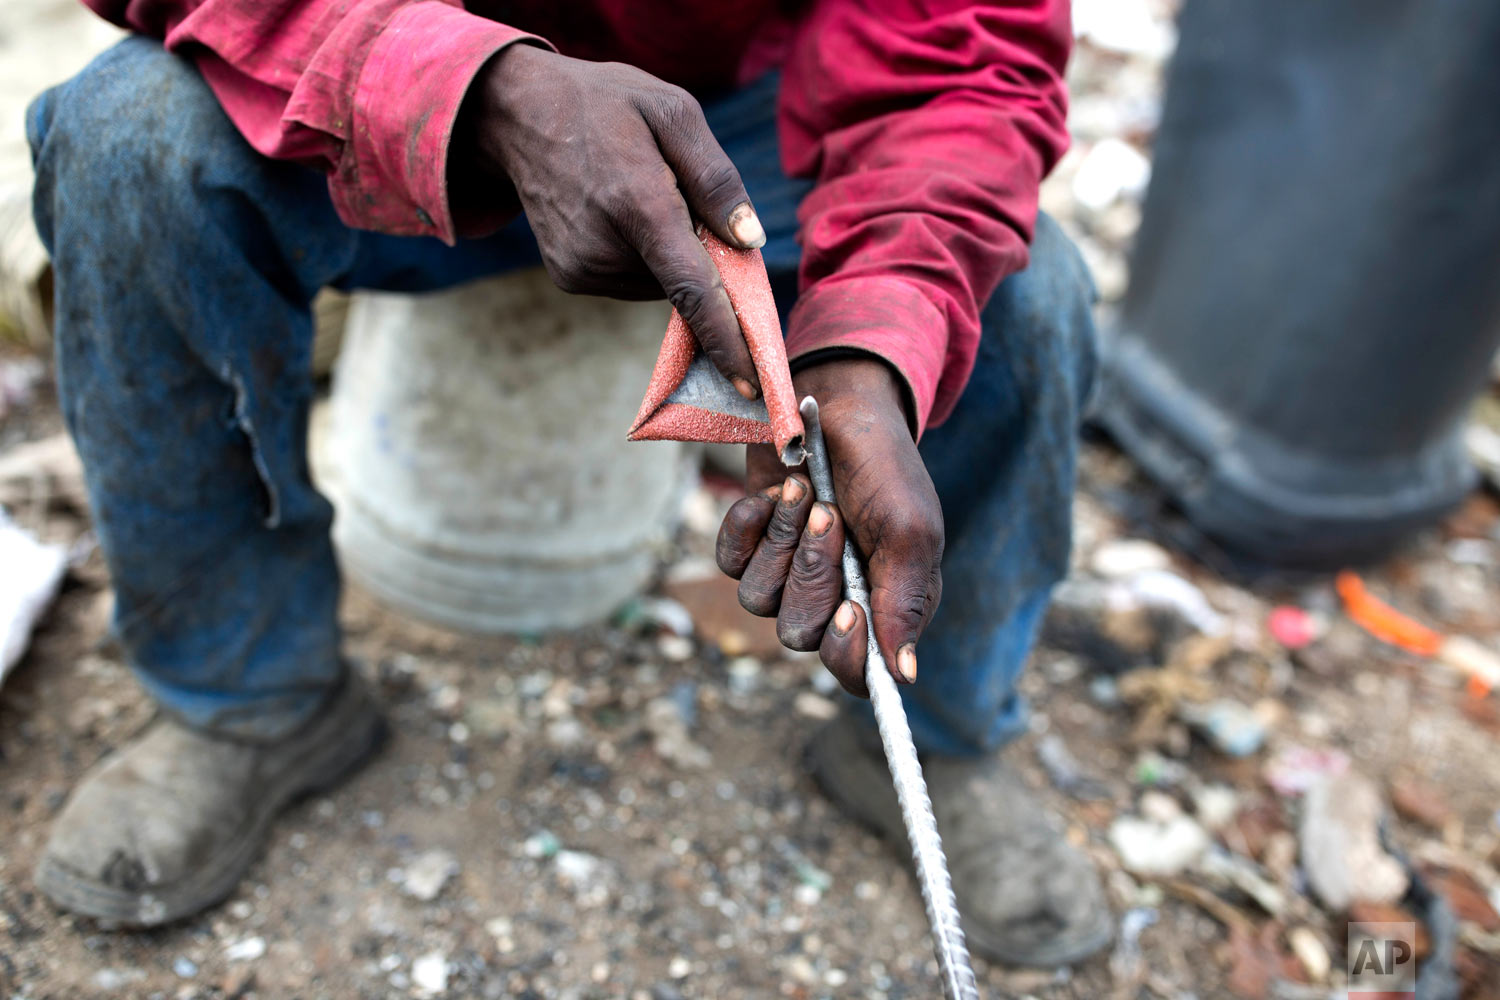  Changlair Aristide sharpens a metal rod he uses to pick through the rubble. Aug. 23, 2018. (AP Photo/Dieu Nalio Chery) 